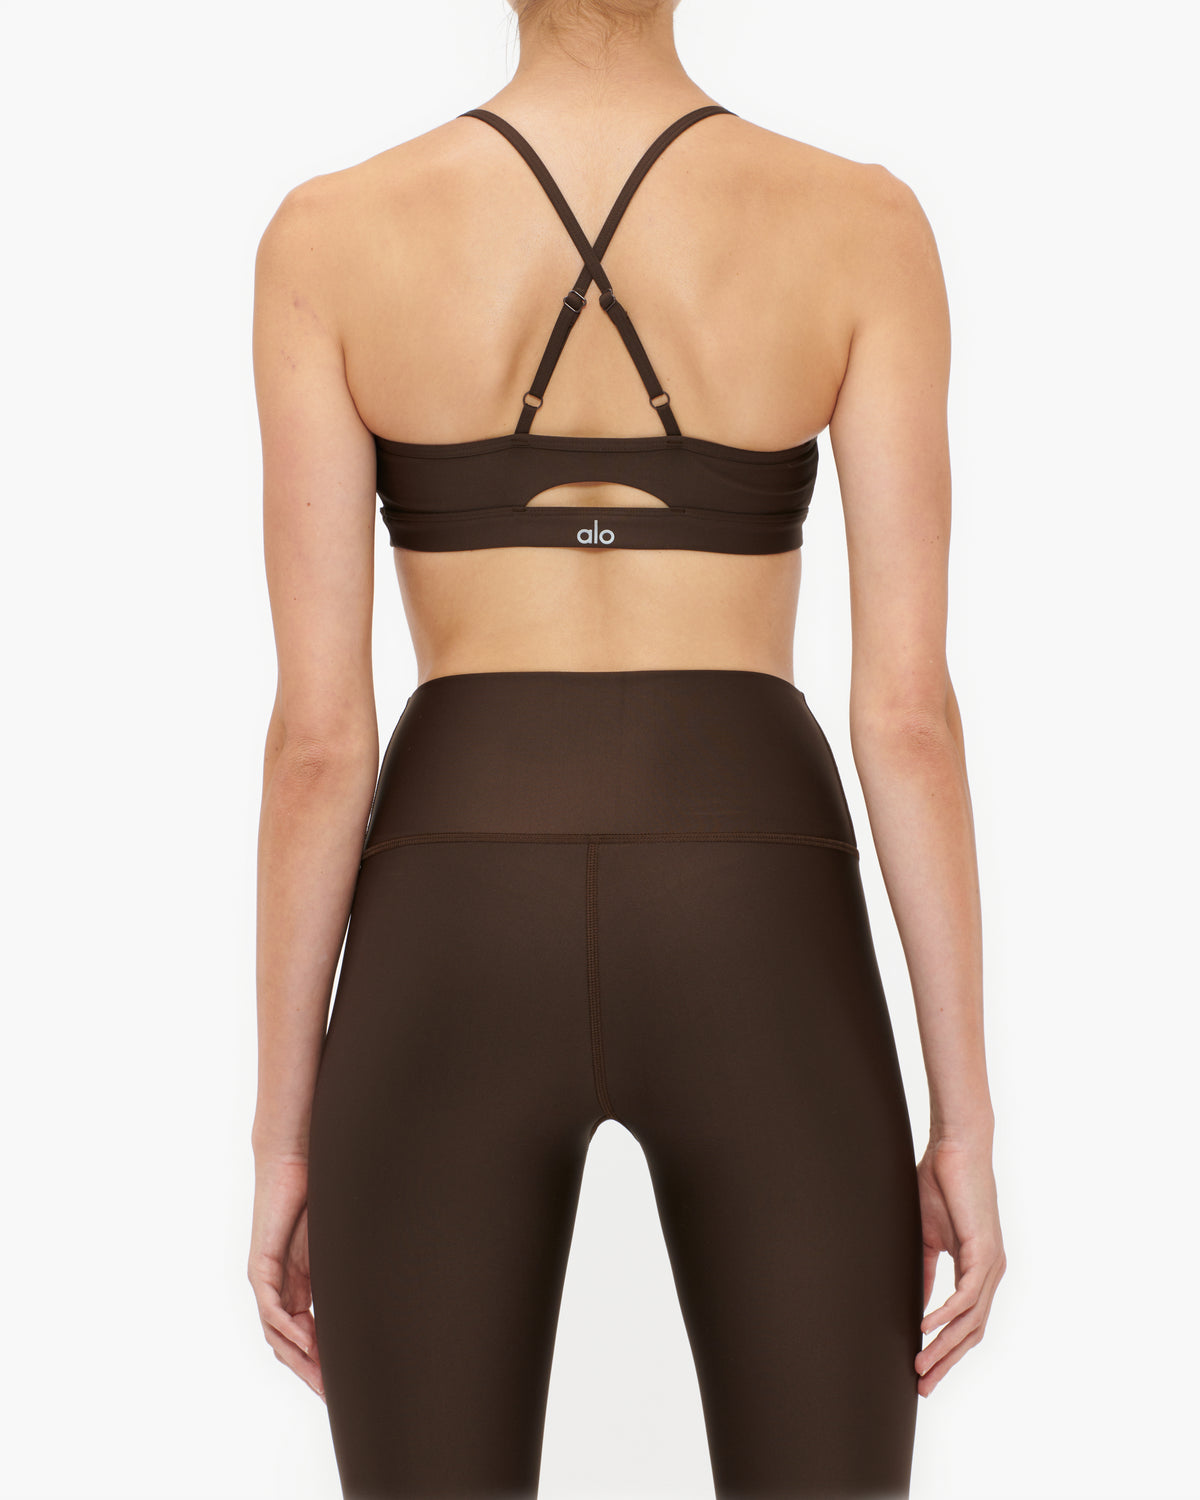 Alo Yoga Mexico  Sunday evening outfit: our airlift intrigue bra